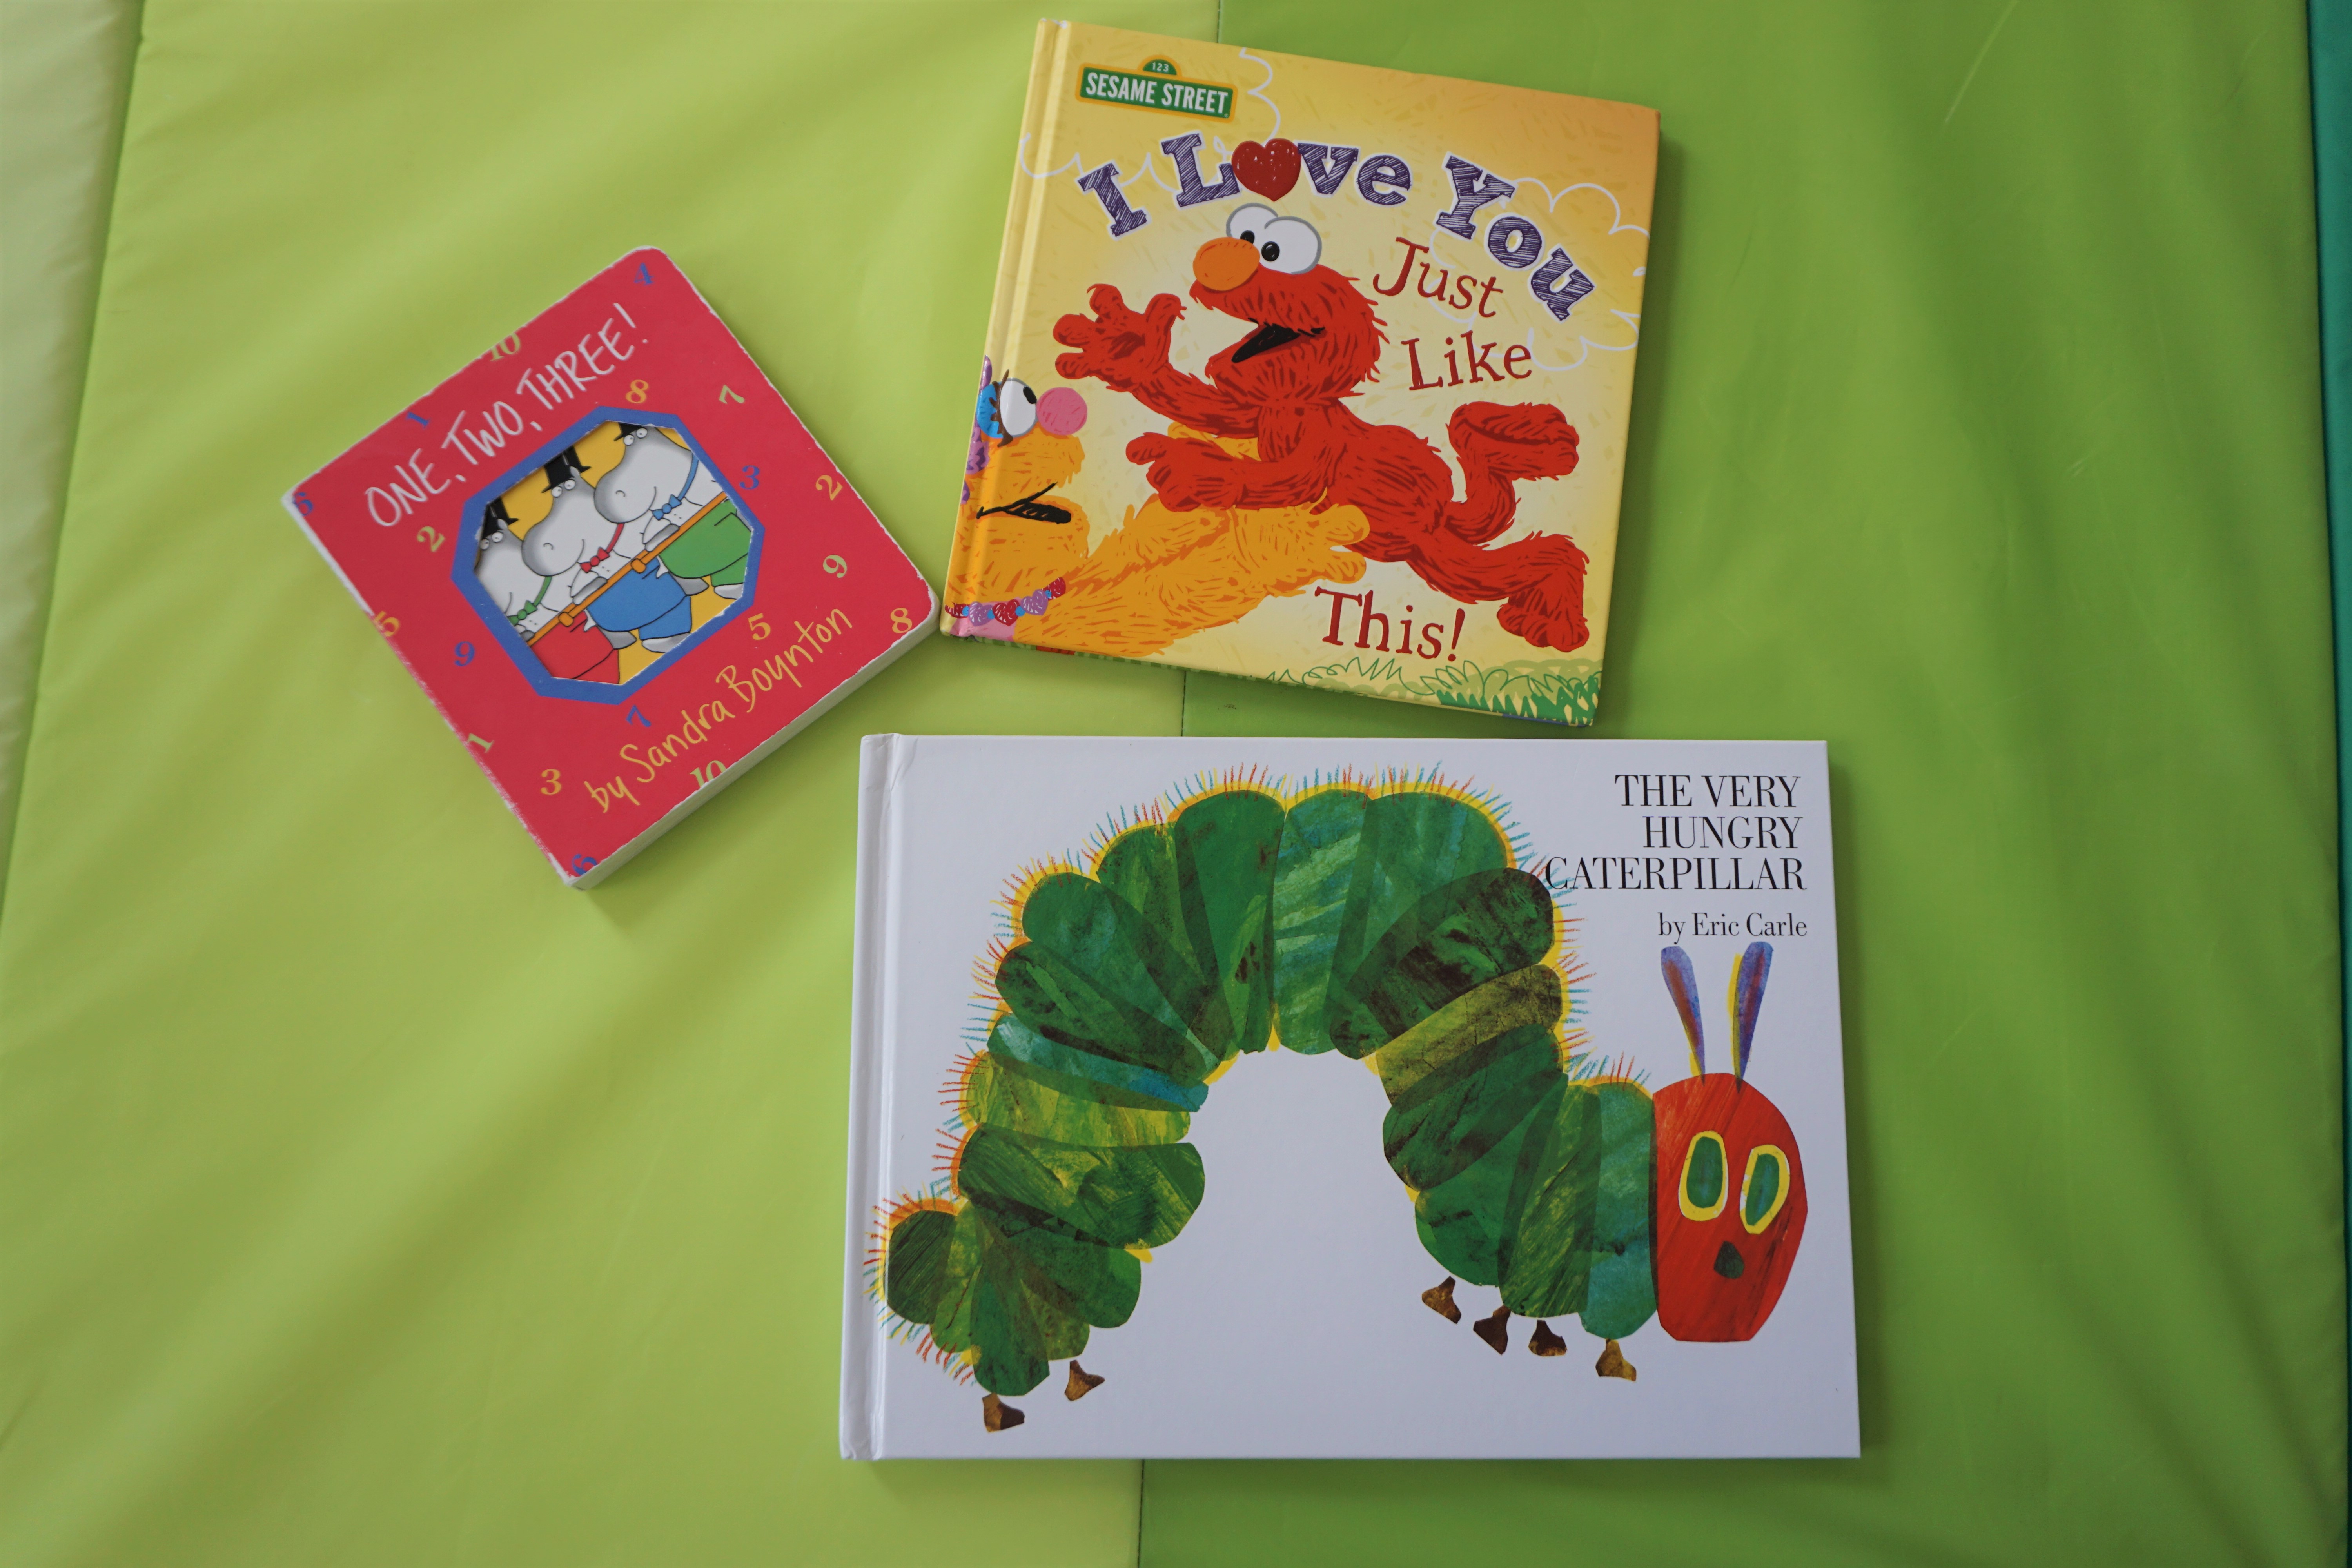 Hungry Caterpillar_I Love You Just Like This_OneTwoThree Books - Photo By Michiko Yoon